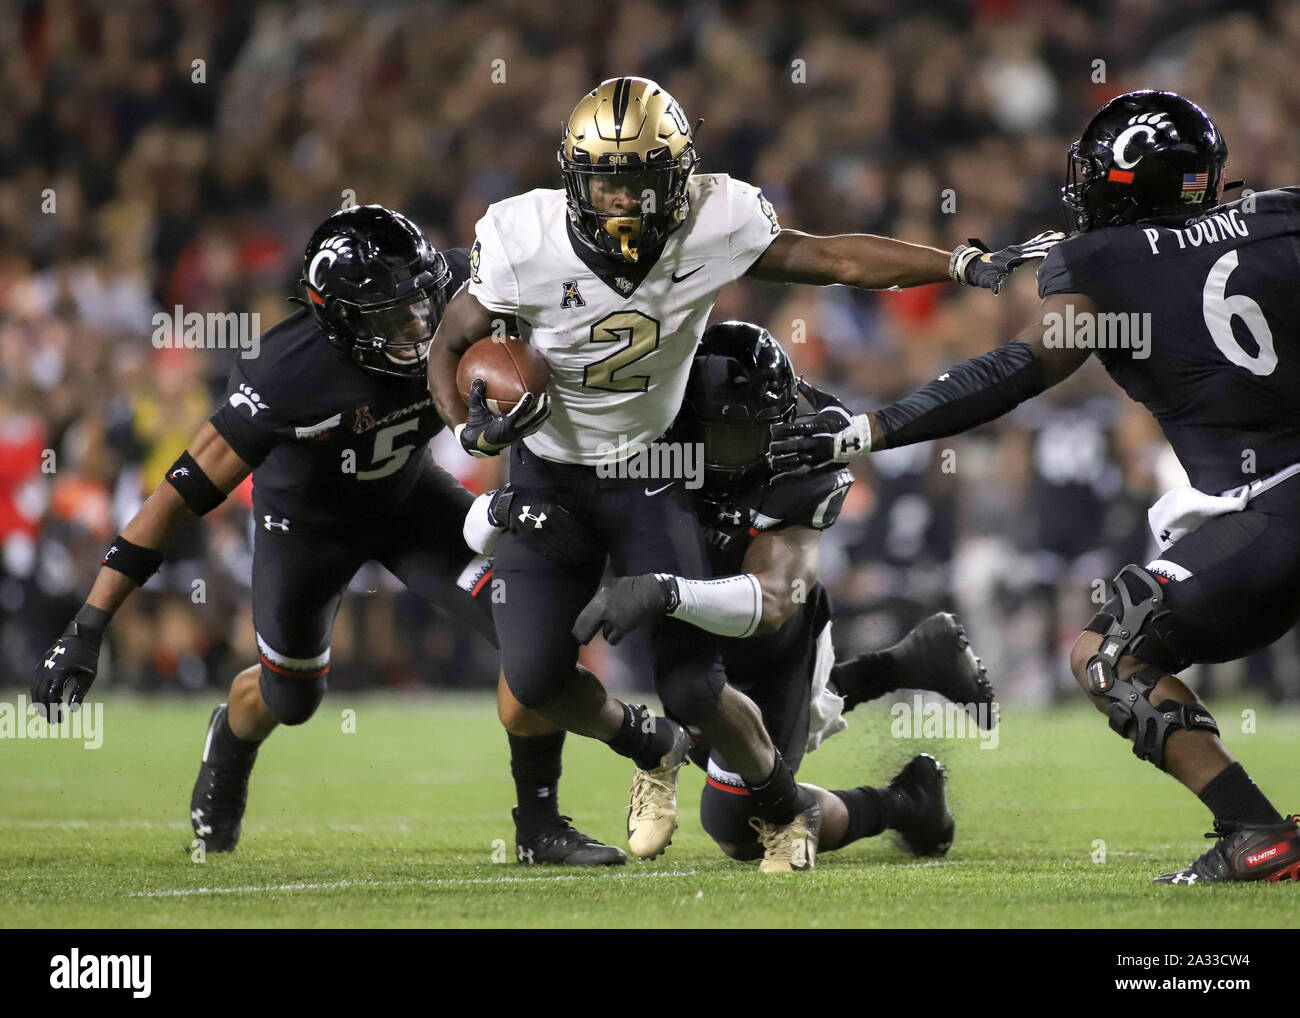 Cincinnati, Ohio, USA. 4th Oct, 2019. UCF's Otis Anderson (2) runs the ball and tries to evade Cincinnati's Darrick Forrest (5) and Perry Young (6) during an NCAA football game between the Cincinnati Bearcats and the UCF Knights at Nippert Stadium in Cincinnati, Ohio. Kevin Schultz/CSM/Alamy Live News Stock Photo